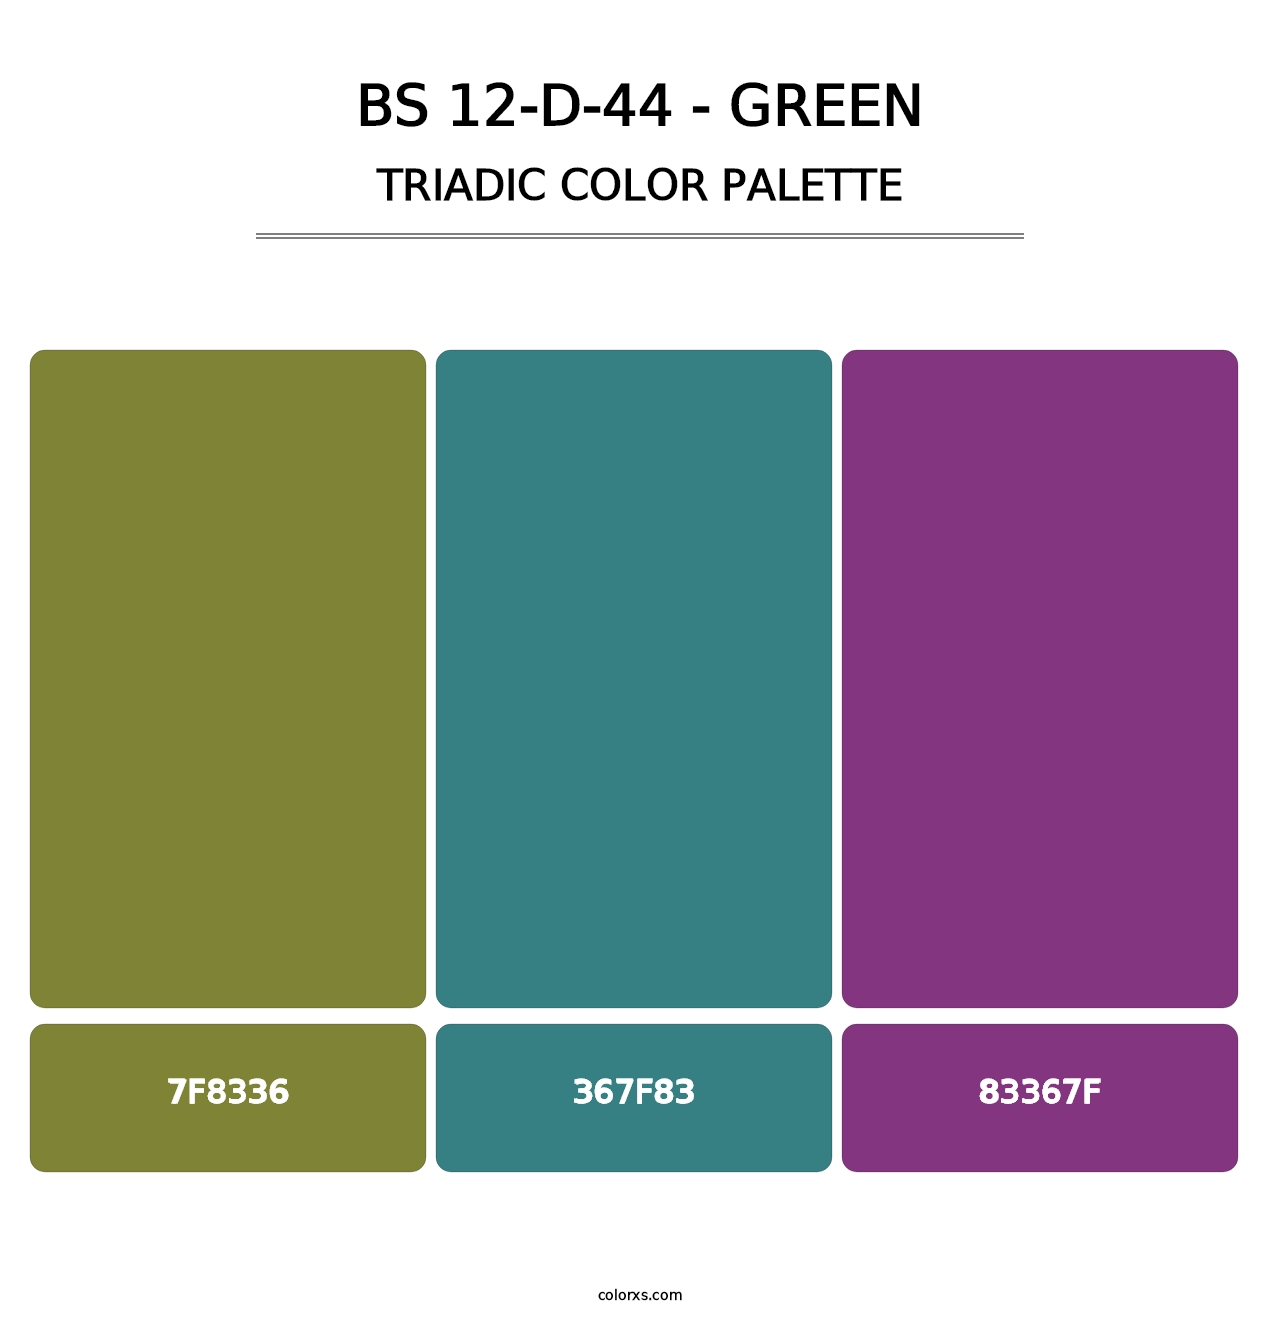 BS 12-D-44 - Green - Triadic Color Palette